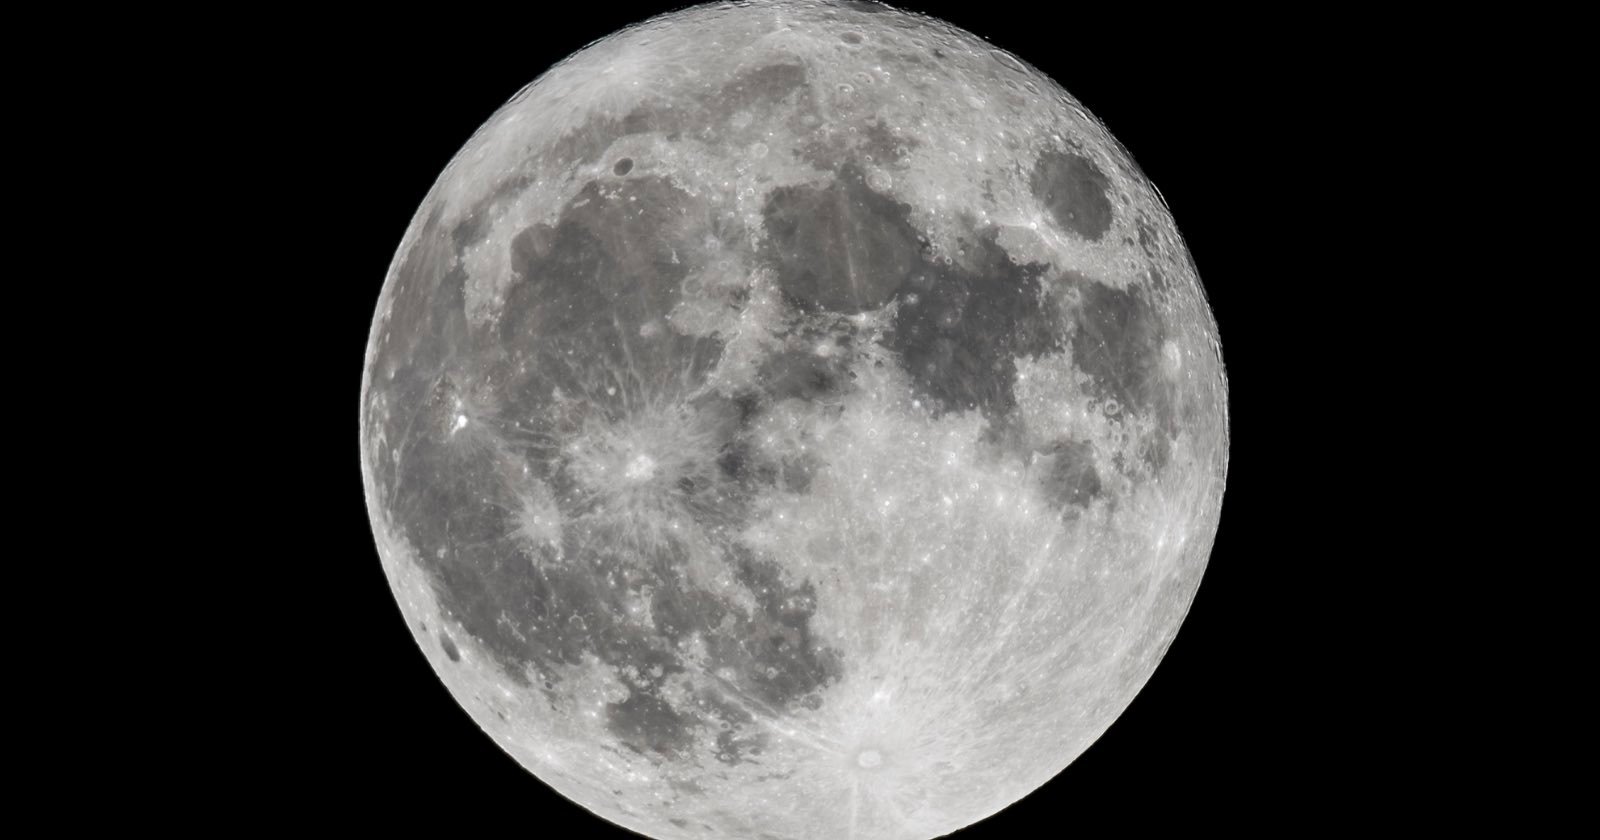 Scientists Could Use Lenses to Make Roads on the Moon